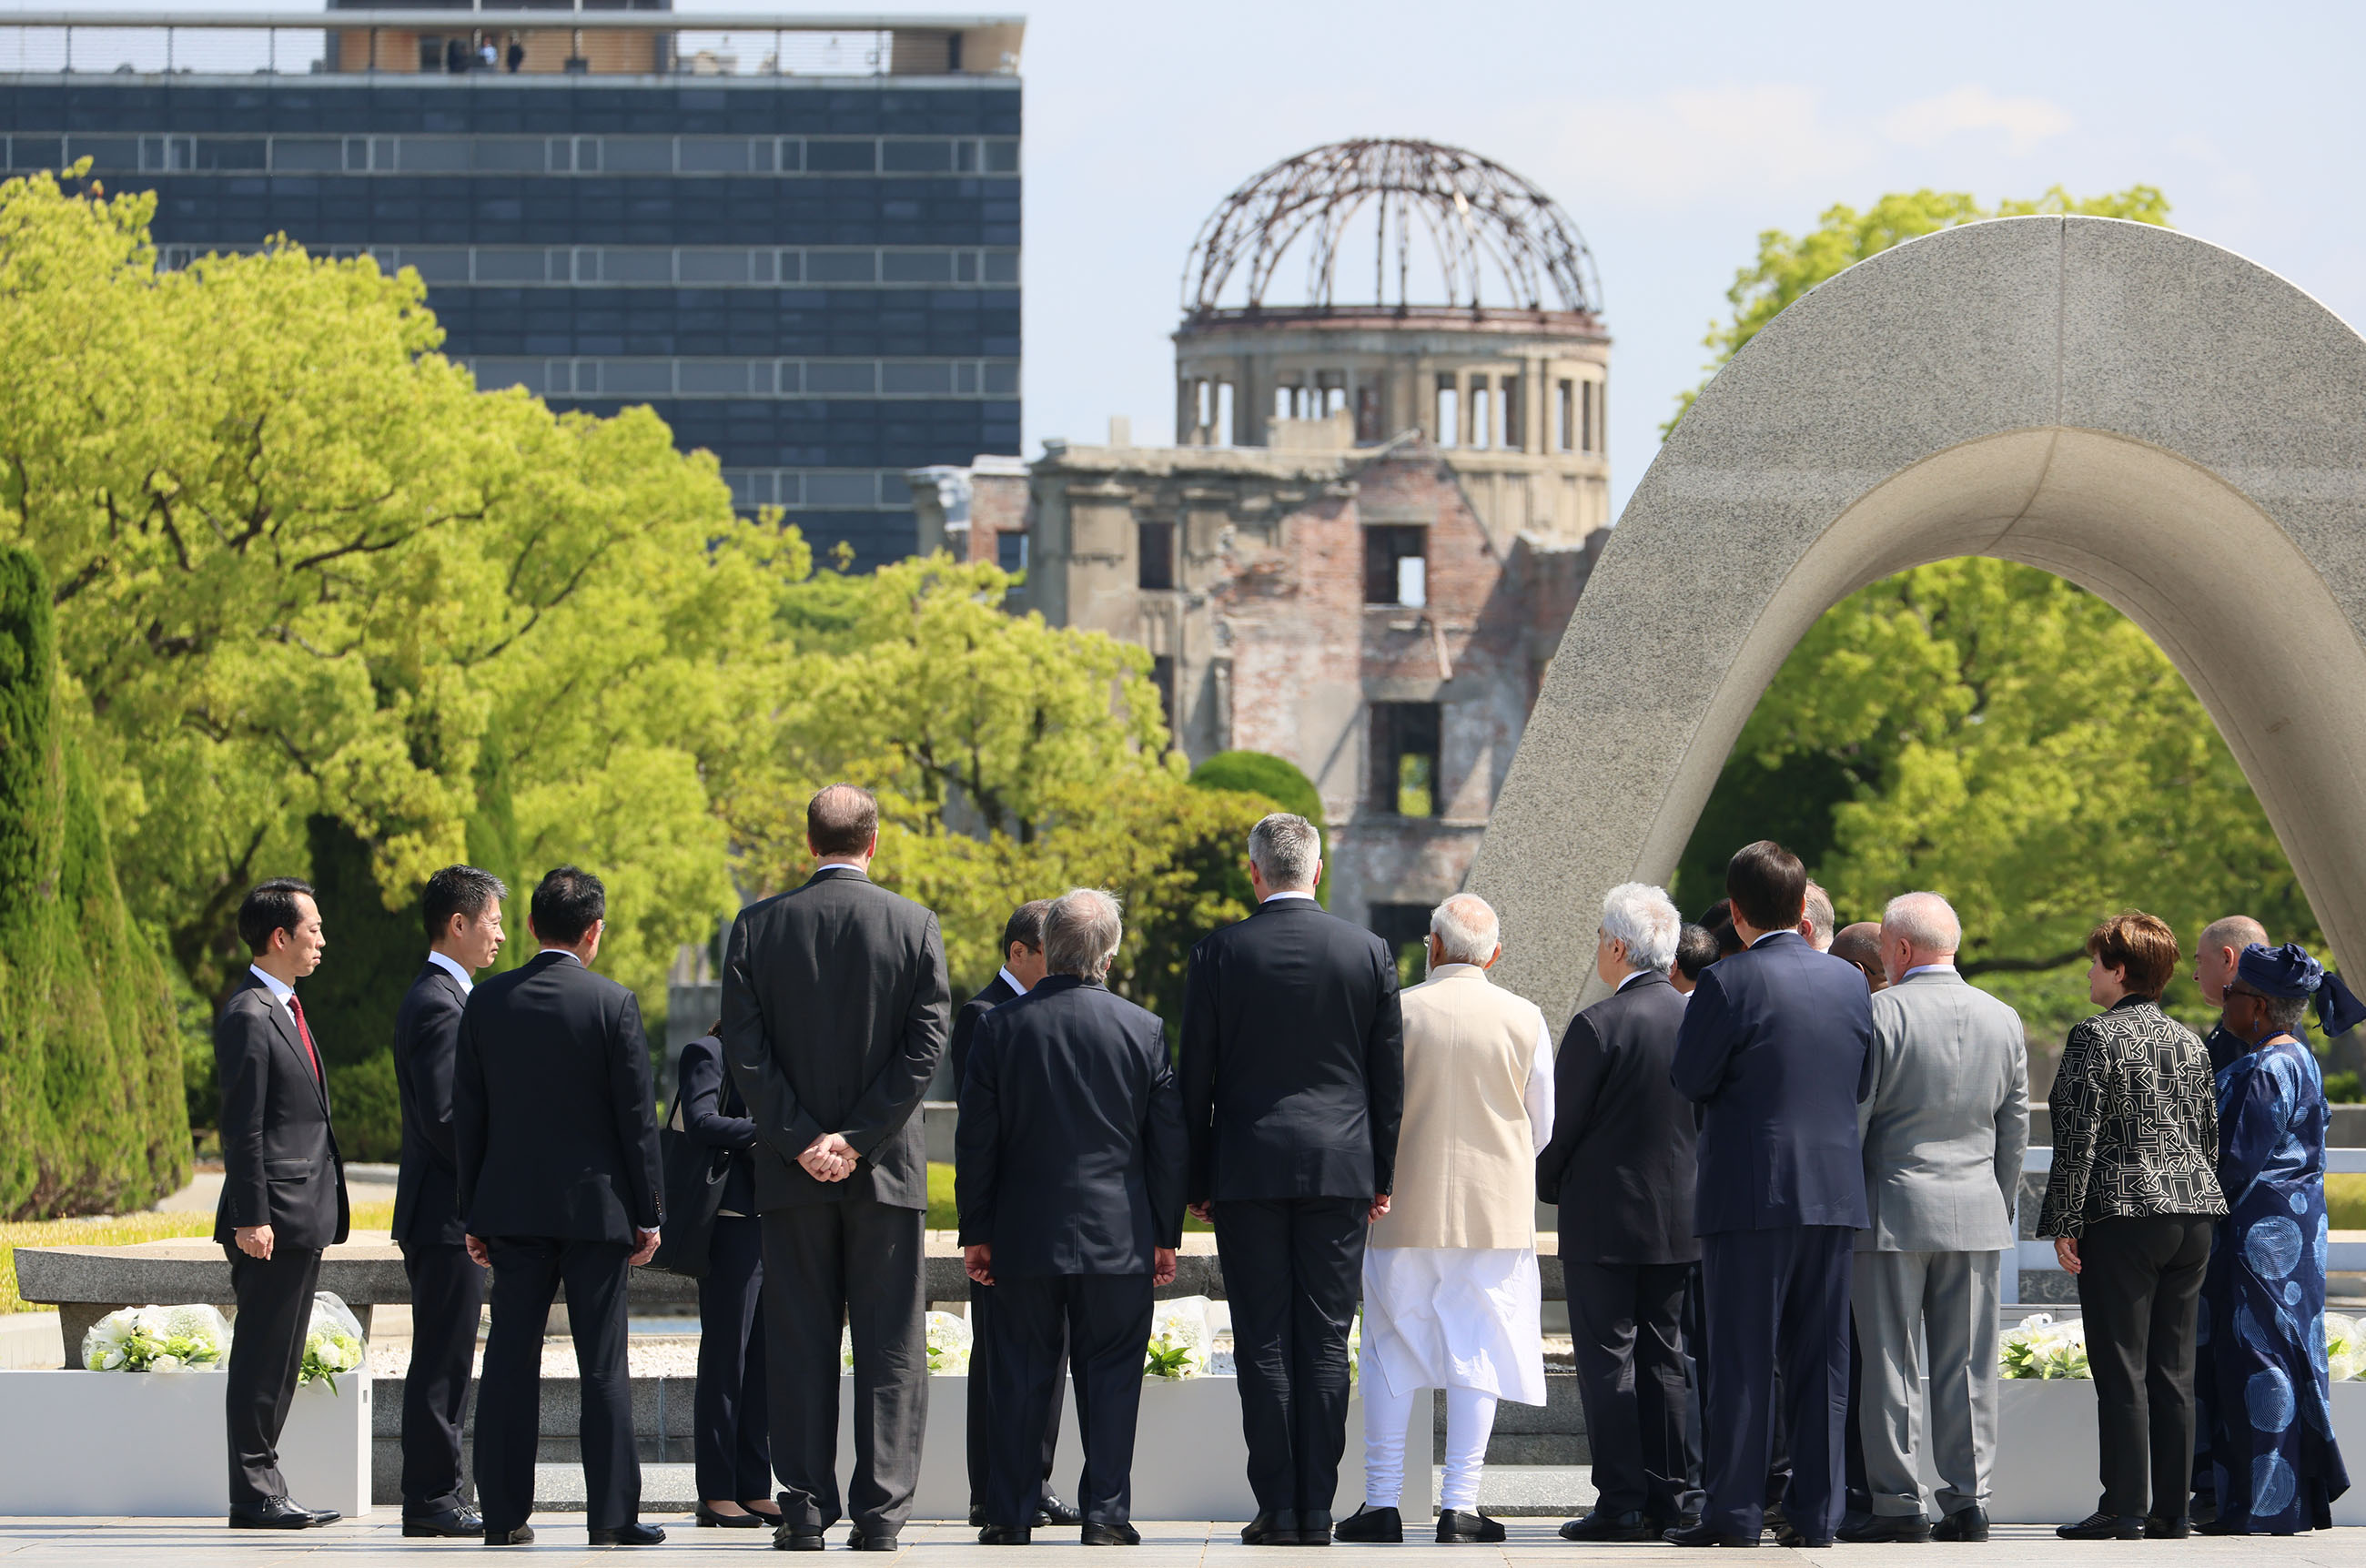 Prime Minister Kishida laying flowers at the Cenotaph for the Atomic Bomb Victims (6)